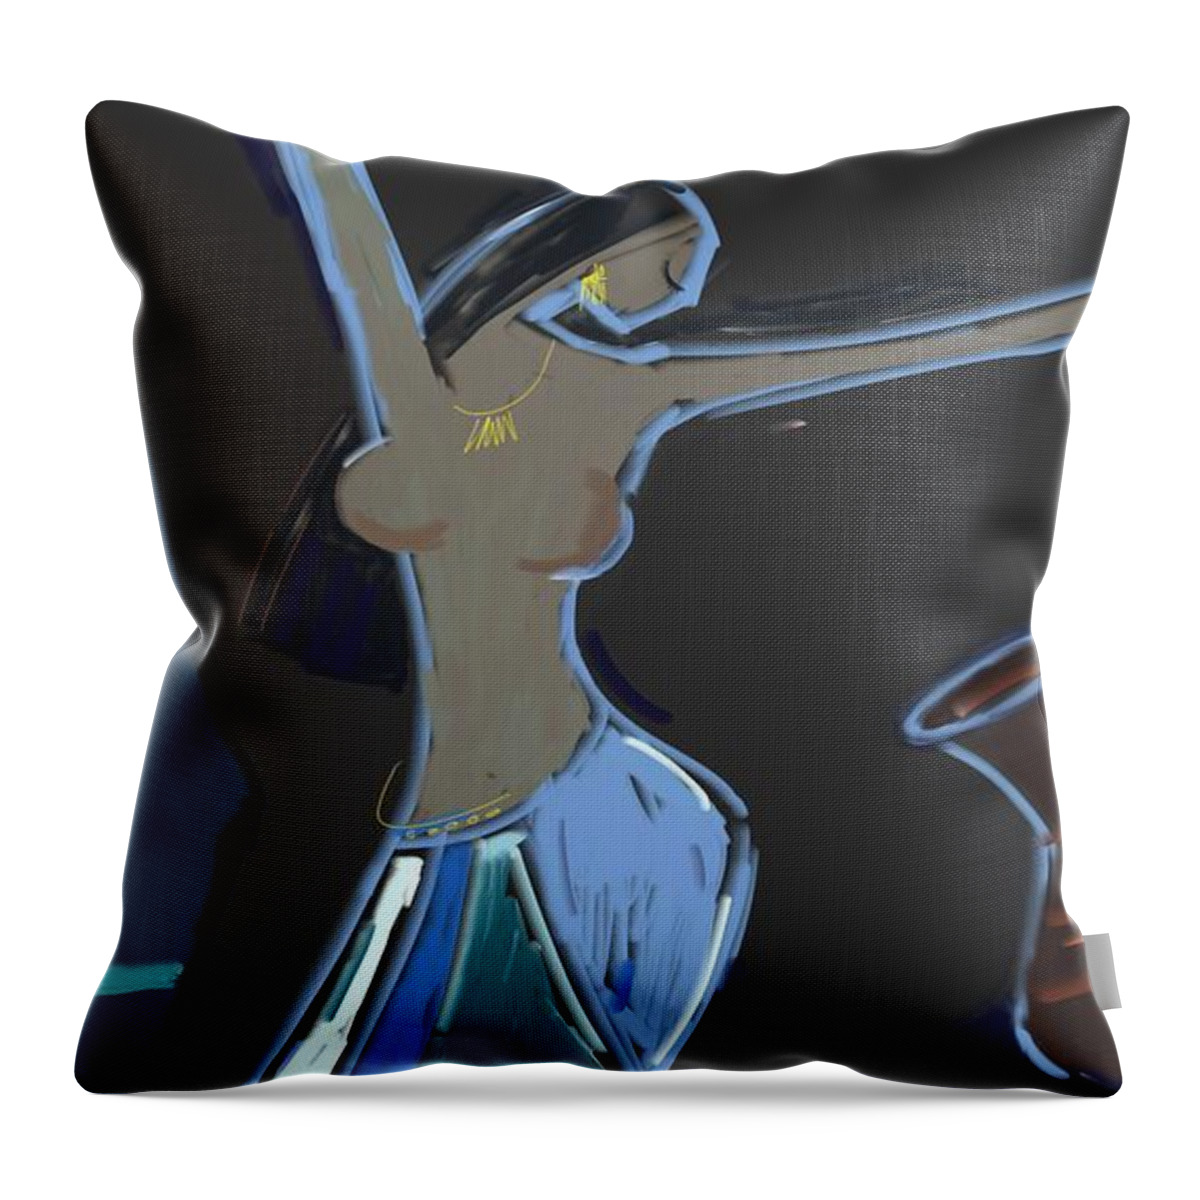 Freedom Expression Liberation Feelings Throw Pillow featuring the painting Untitled 28 by Vilas Malankar